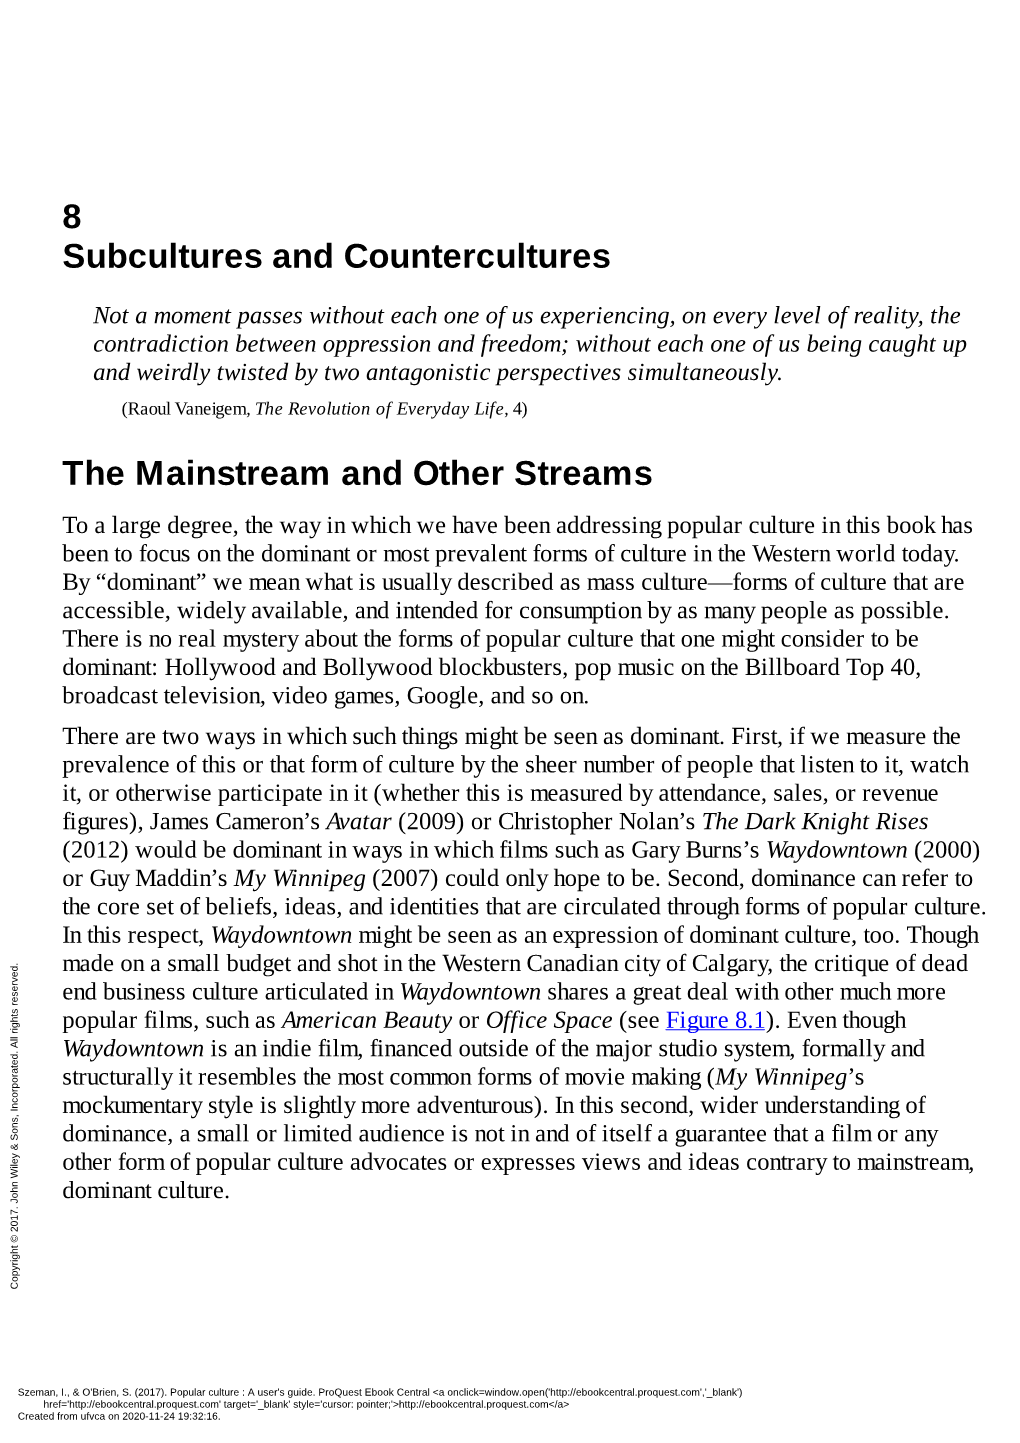 8 Subcultures and Countercultures The